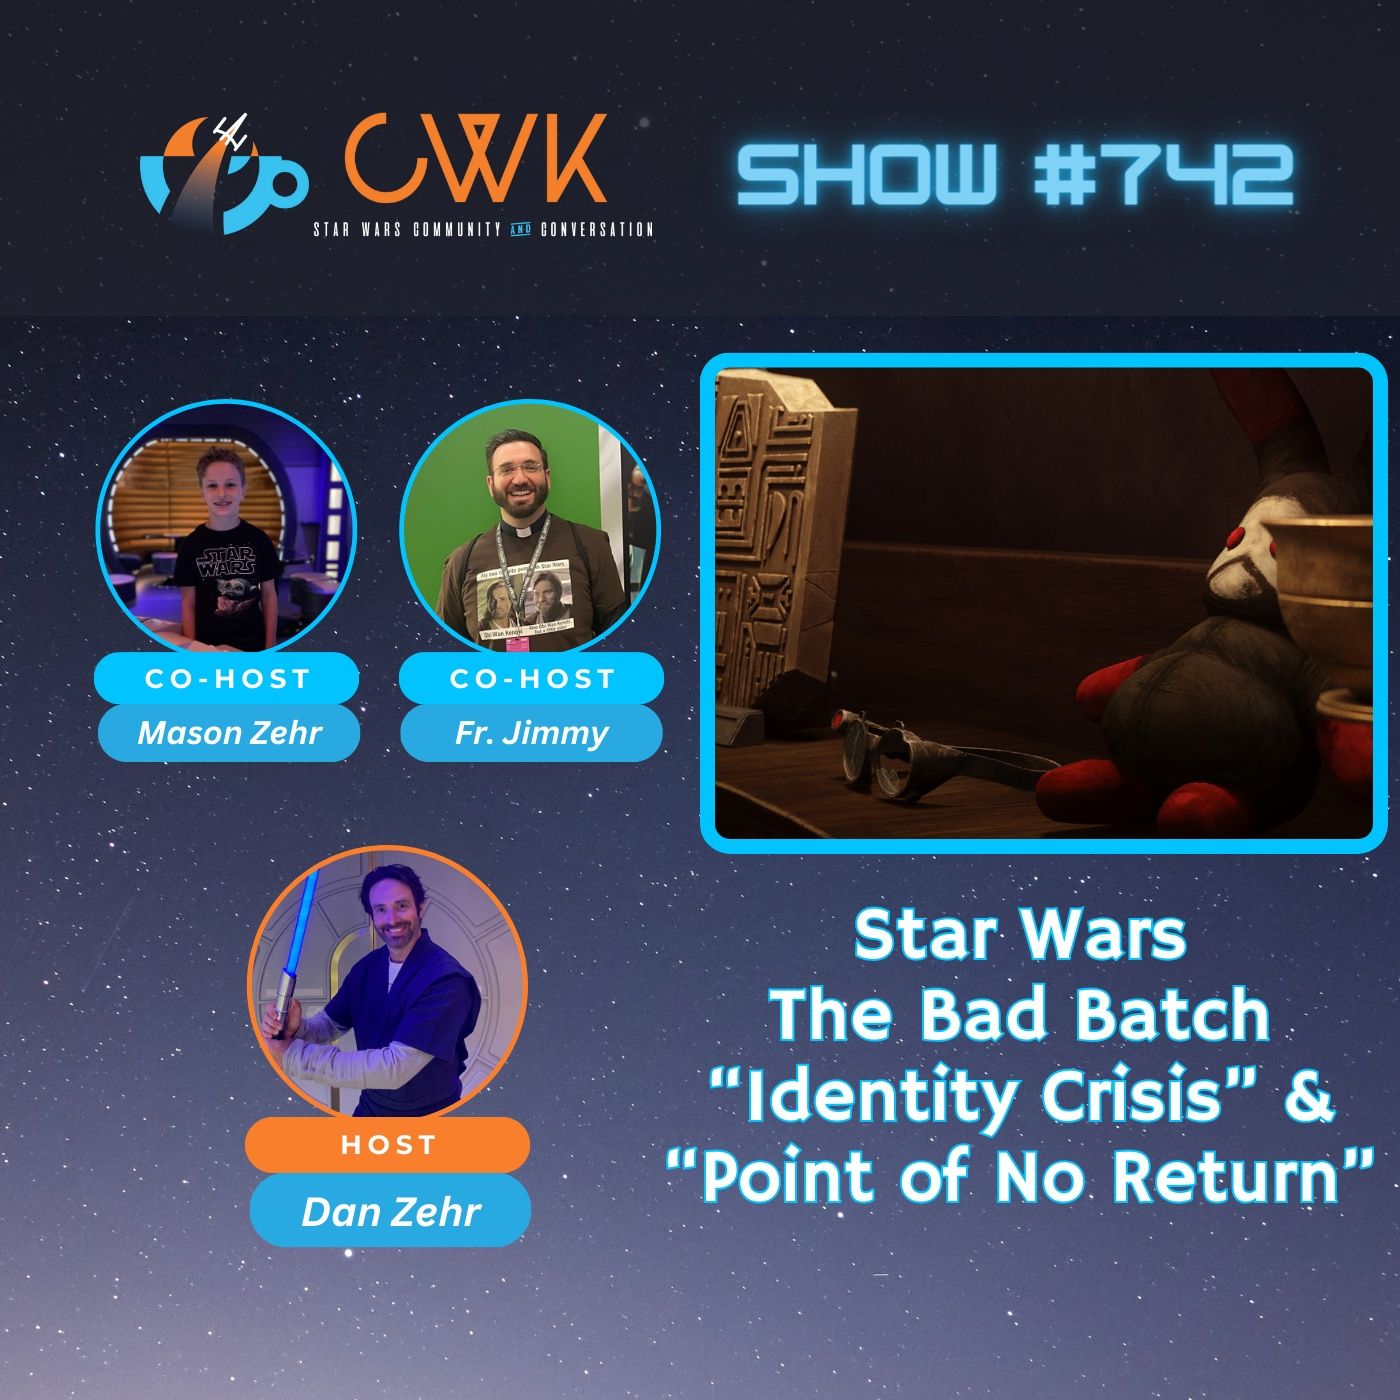 CWK Show #742: The Bad Batch- “Identity Crisis” & ”Point of No Return”